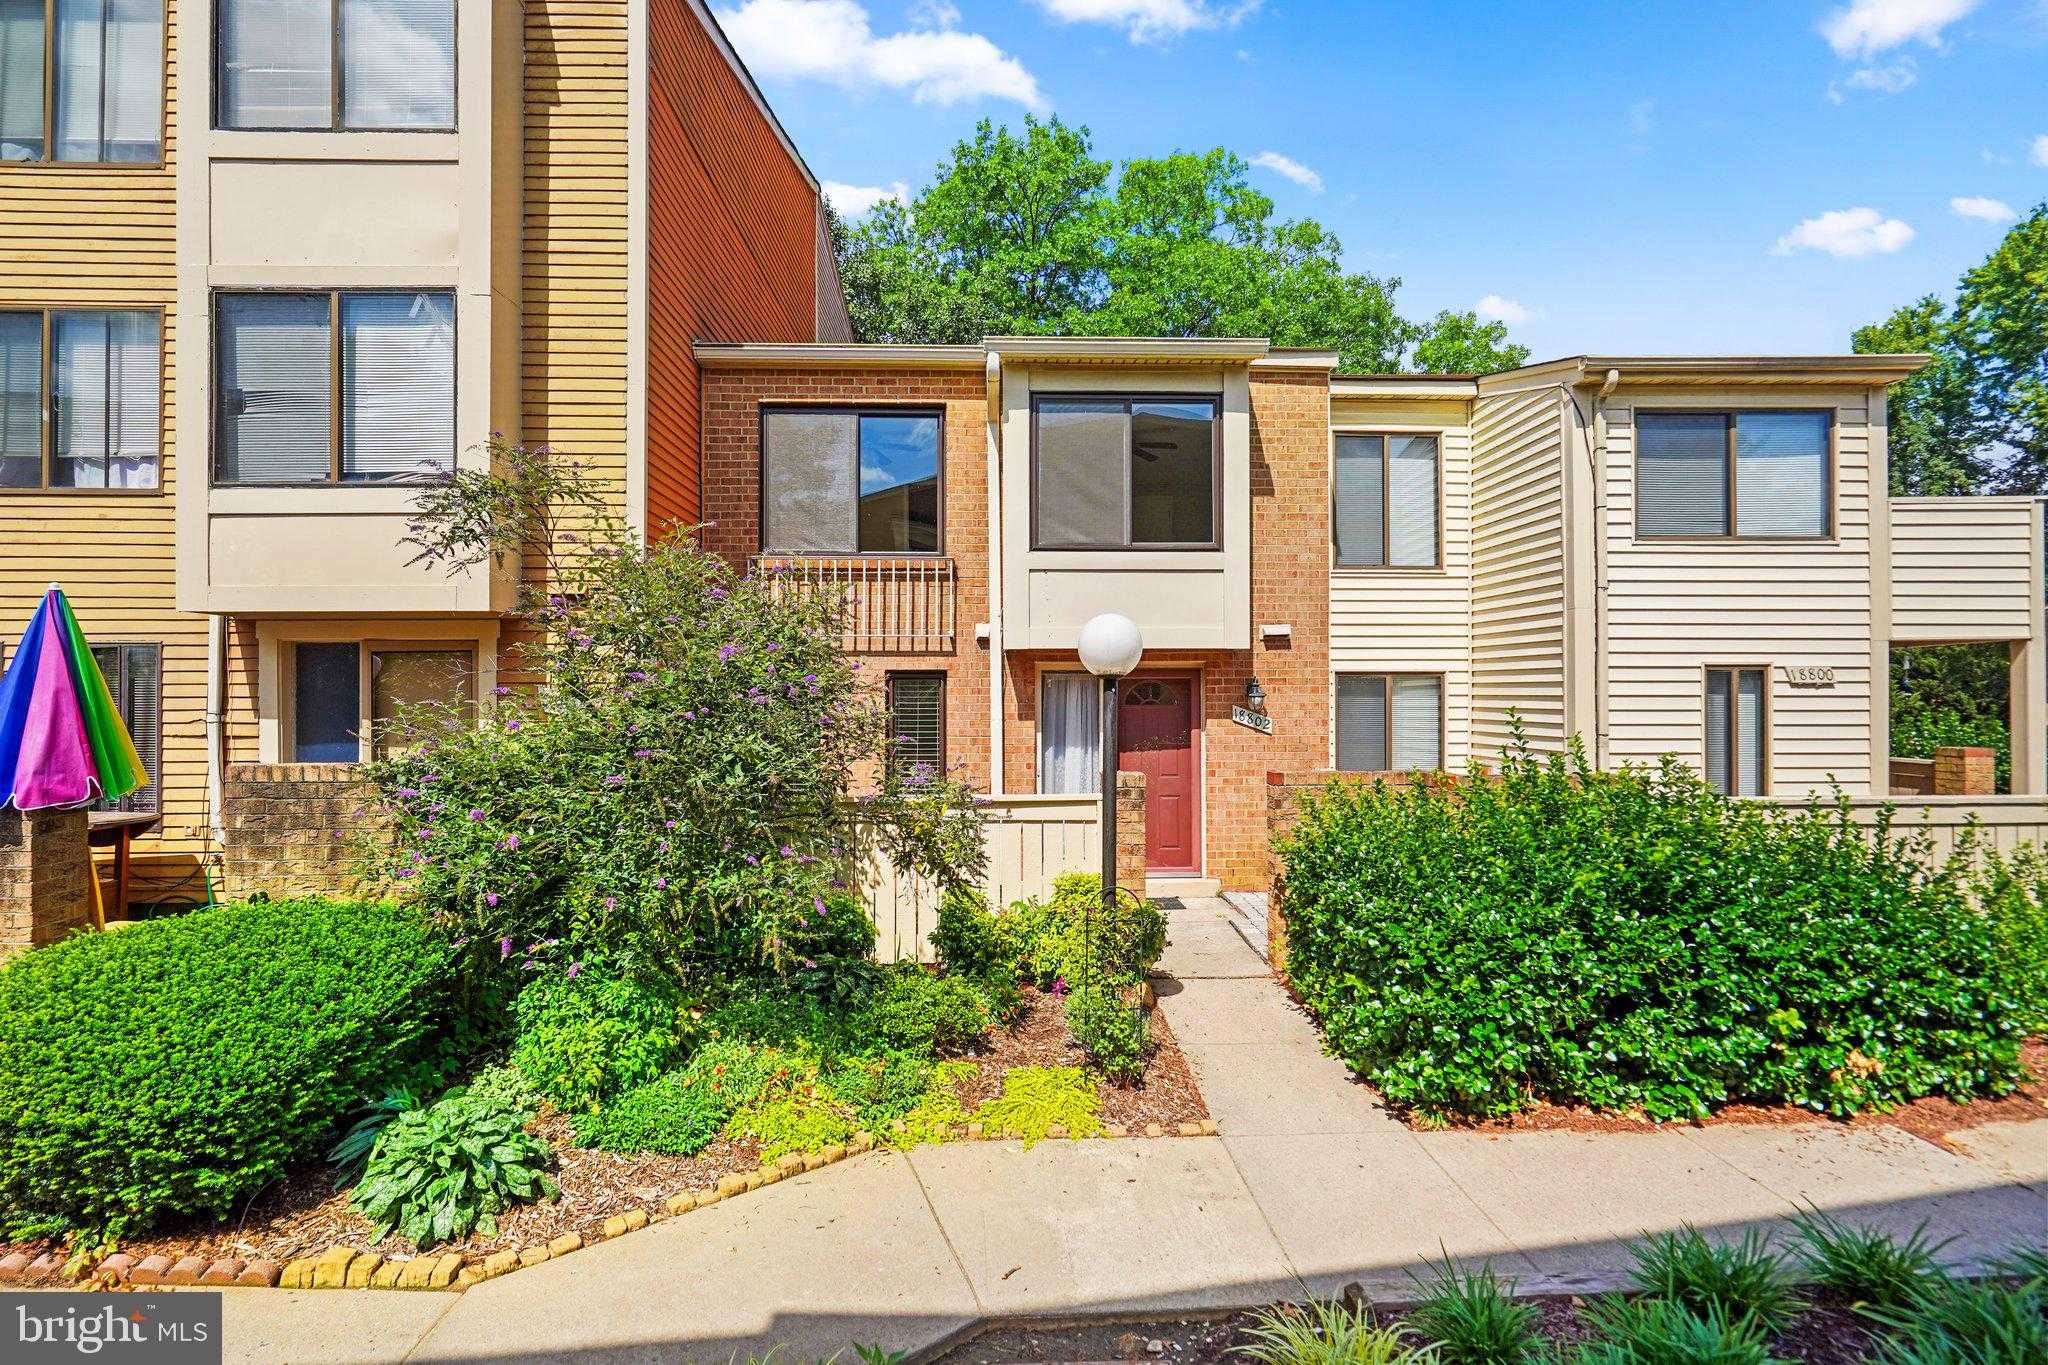 View MONTGOMERY VILLAGE, MD 20886 townhome